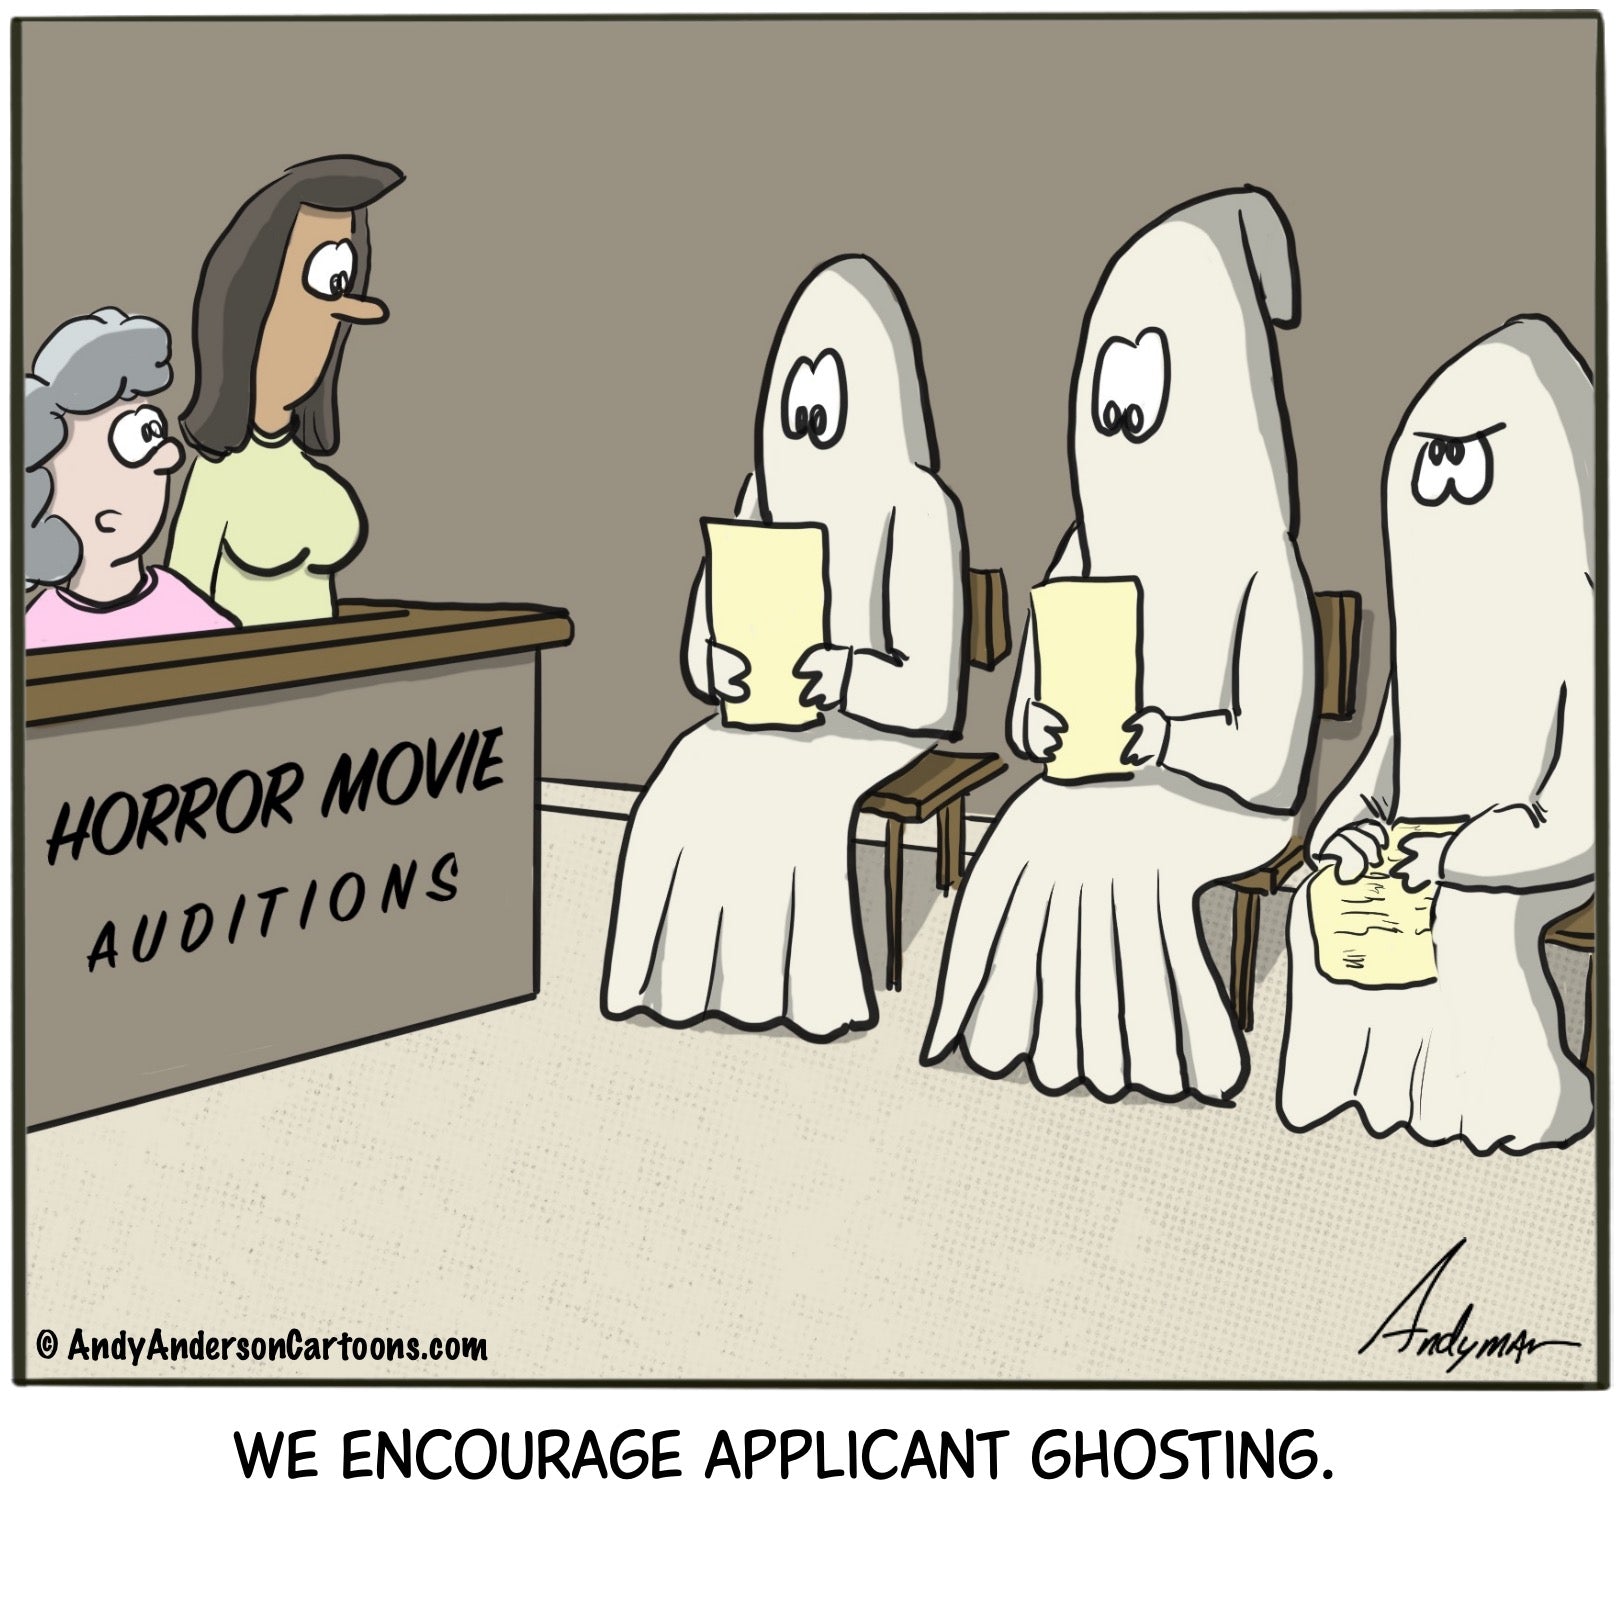 Cartoon about applicant ghosting by Andy Anderson